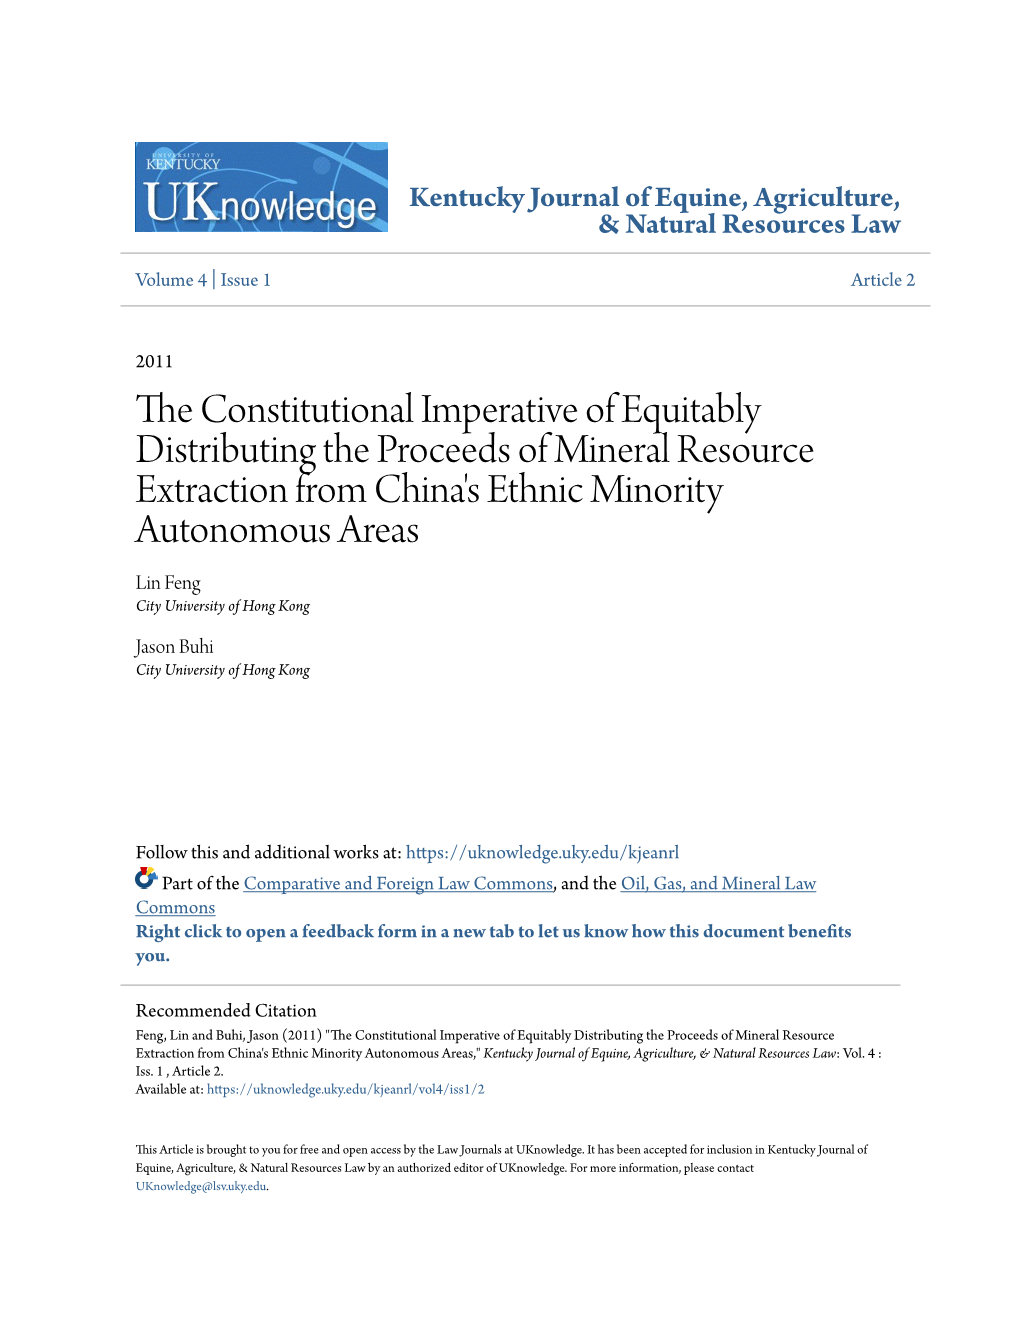 The Constitutional Imperative of Equitably Distributing the Proceeds of Mineral Resource Extraction from China's Ethnic Minority Autonomous Areas